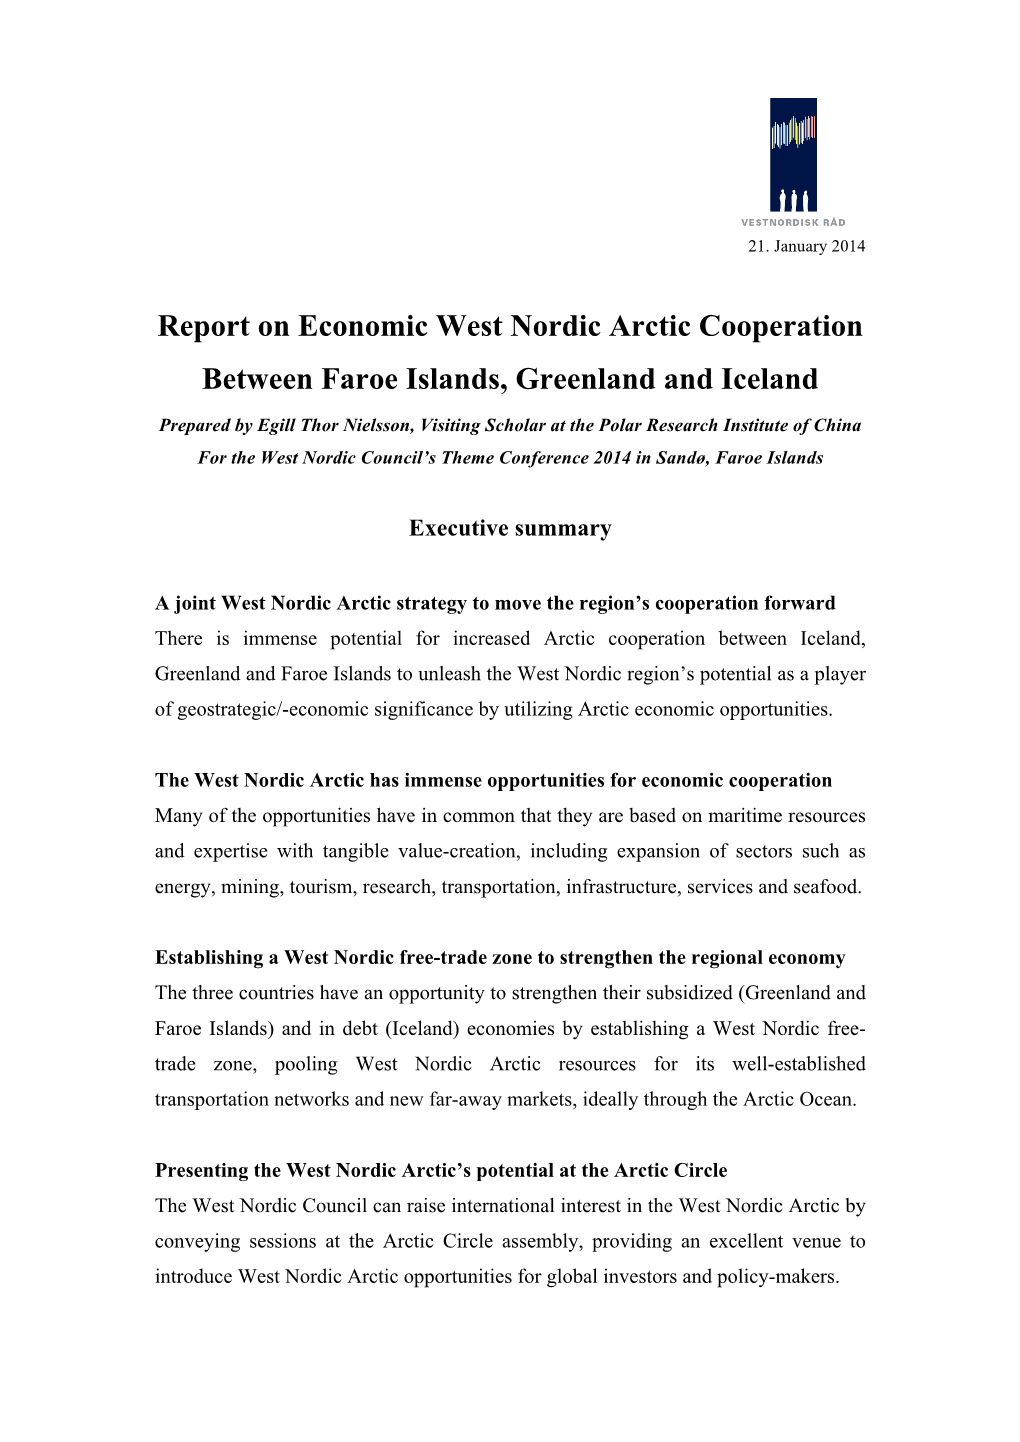 Report on Economic West Nordic Arctic Cooperation Between Faroe Islands, Greenland and Iceland